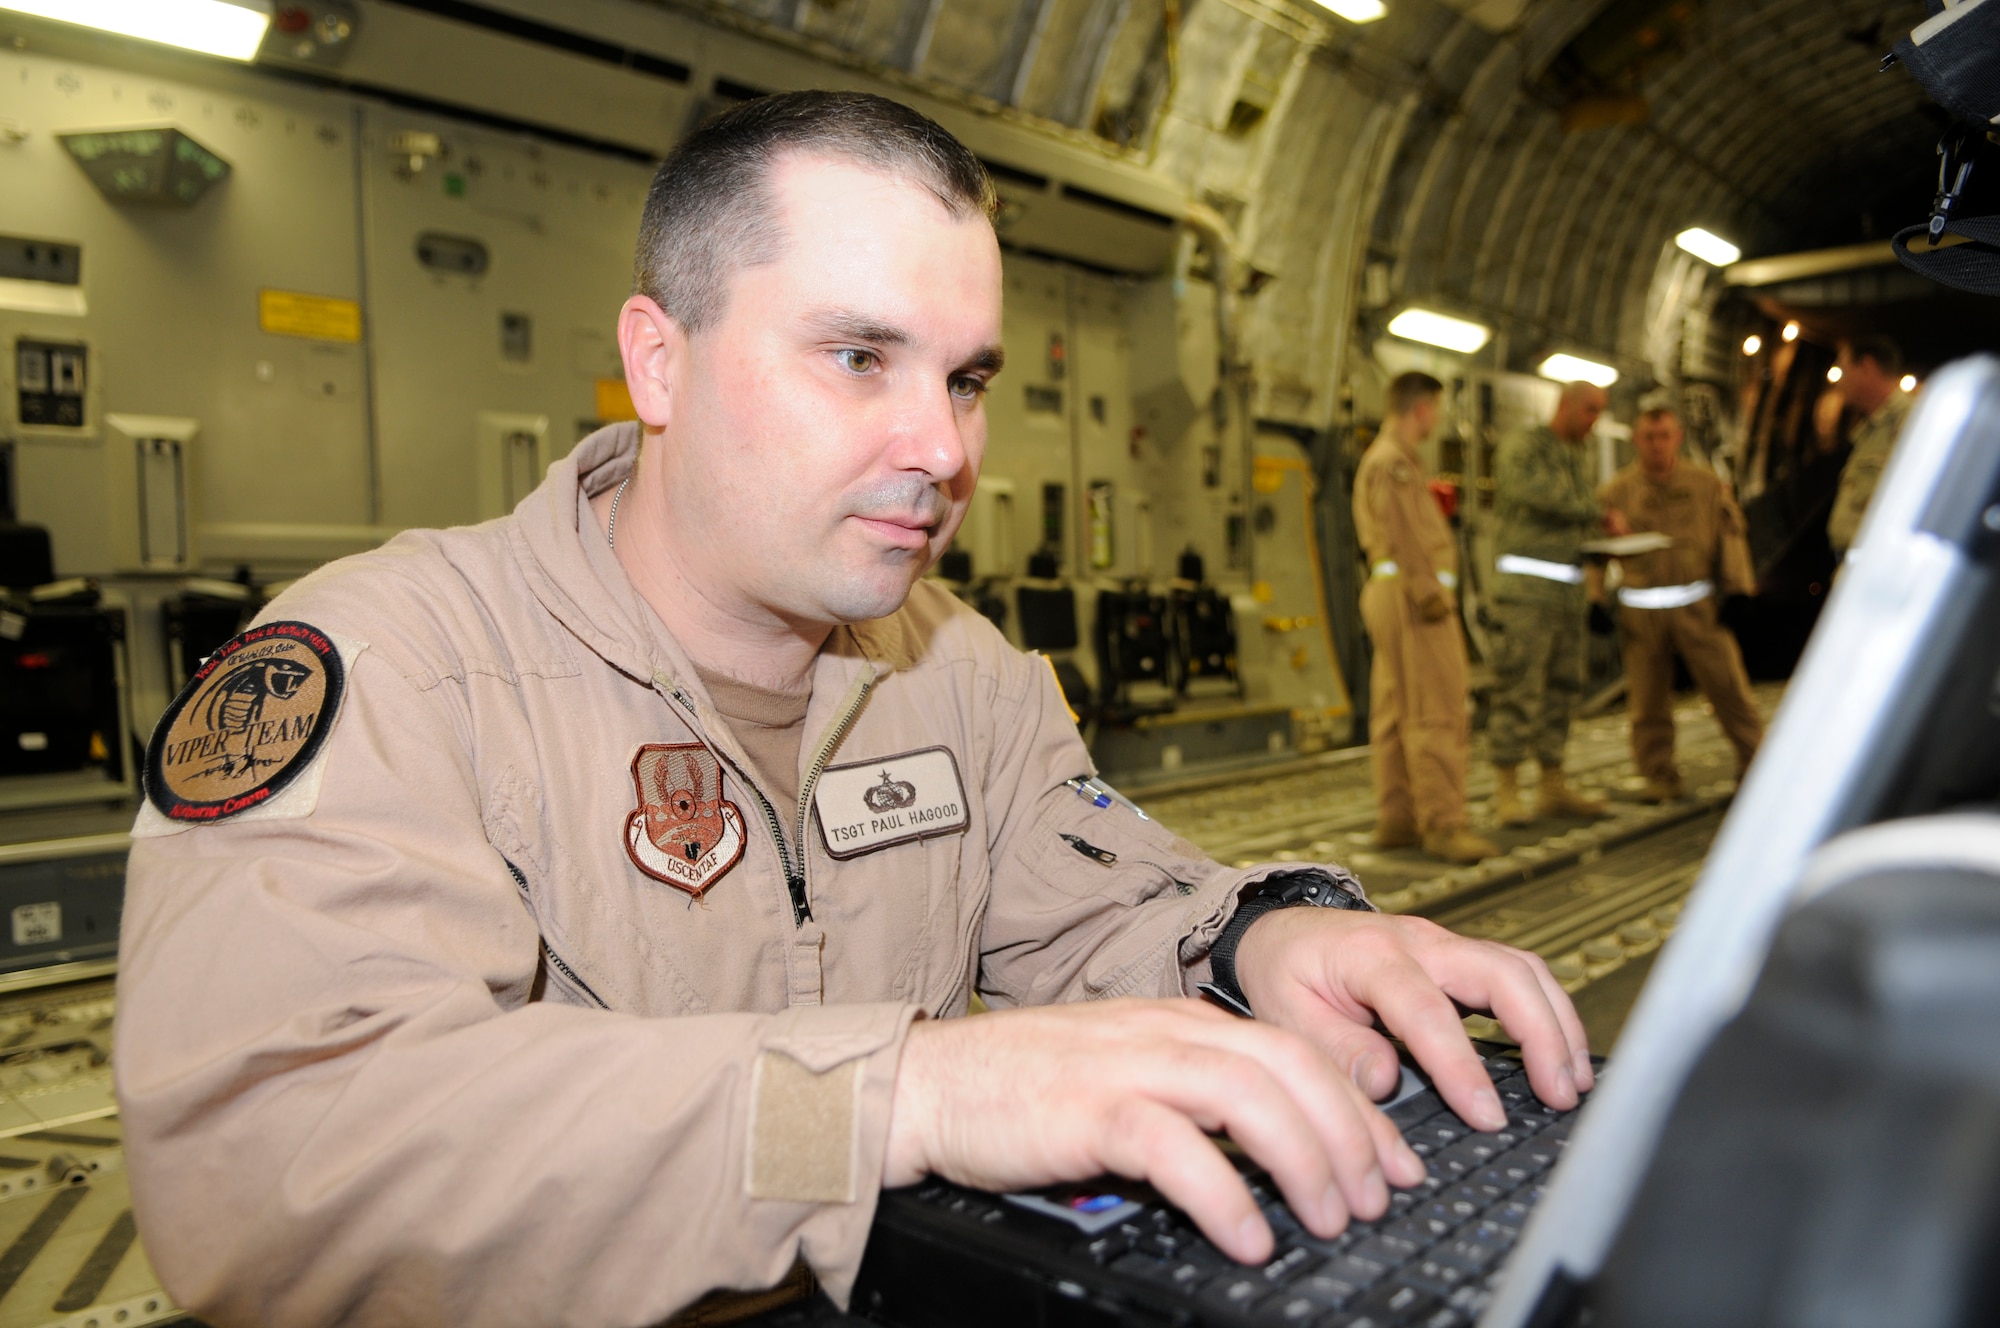 Tech Sgt. Paul D. Hagood, 379th Expeditionary Communications Squadron, monitors the Viper system while on a C-17 at a Southwest Asia air base Feb 19. Sergeant Hagood is able to monitor the aircraft position, signal strength, and equipment status. He is deployed from Schriever Air Force Base, Colo. (U.S. Air Force photo/Tech. Sgt. Johnny L. Saldivar)